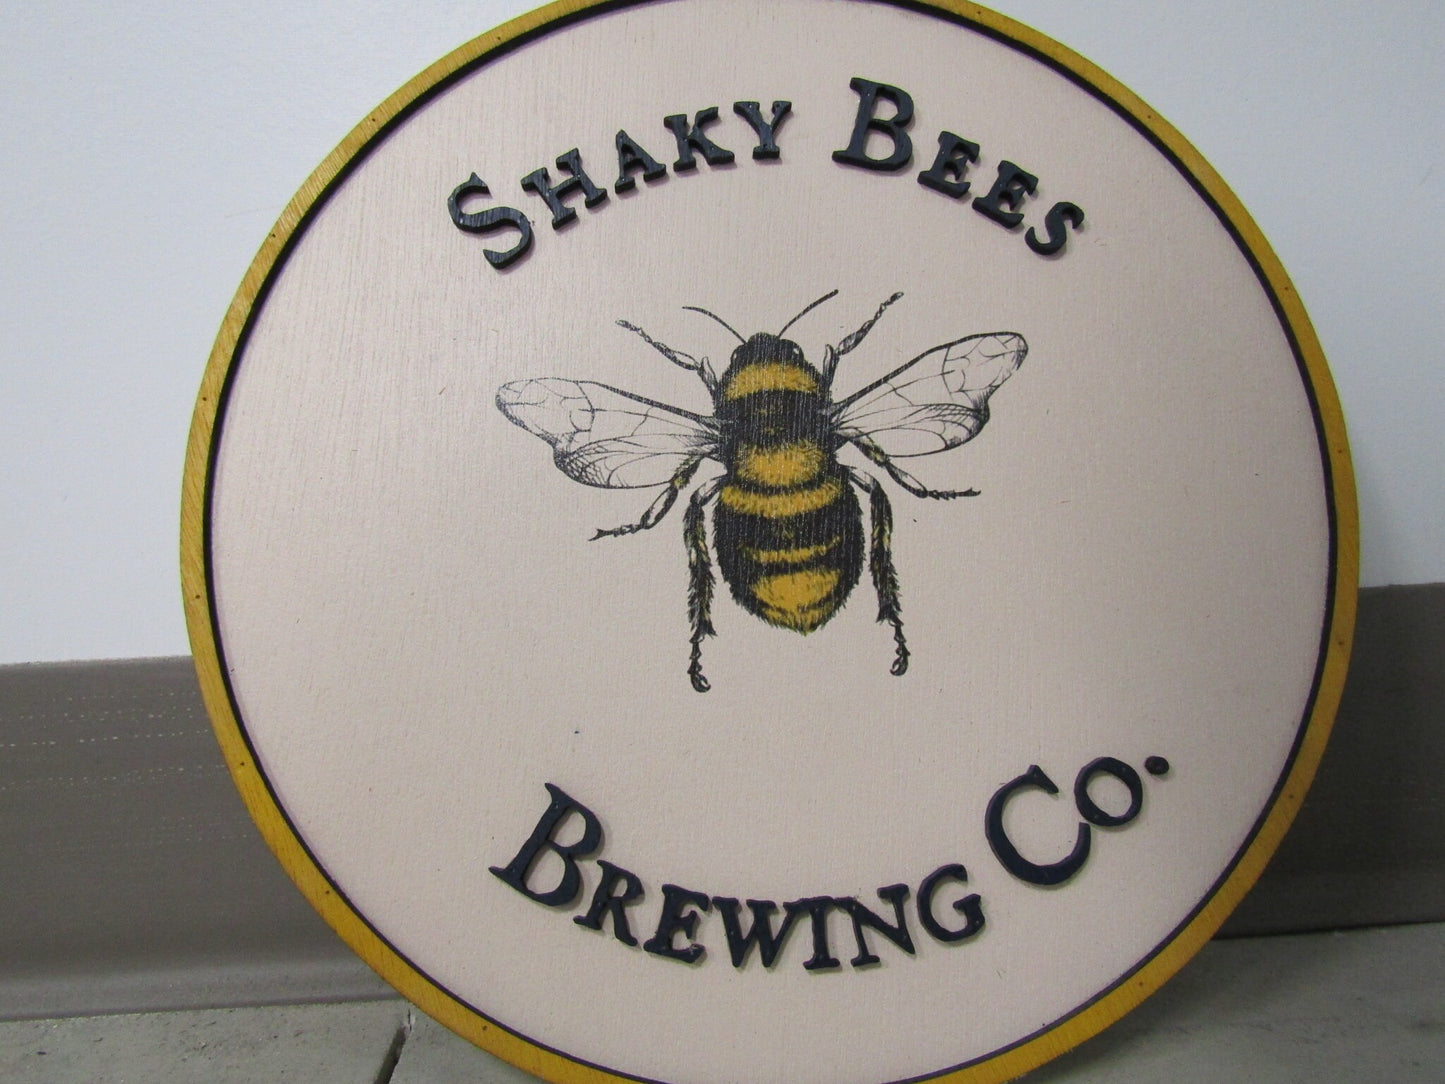 Custom Sign Round Brewing Co Business Commerical Signage Bumble Bee Beer Eatery Store Front Entrance Made to Order Logo Wooden Handmade